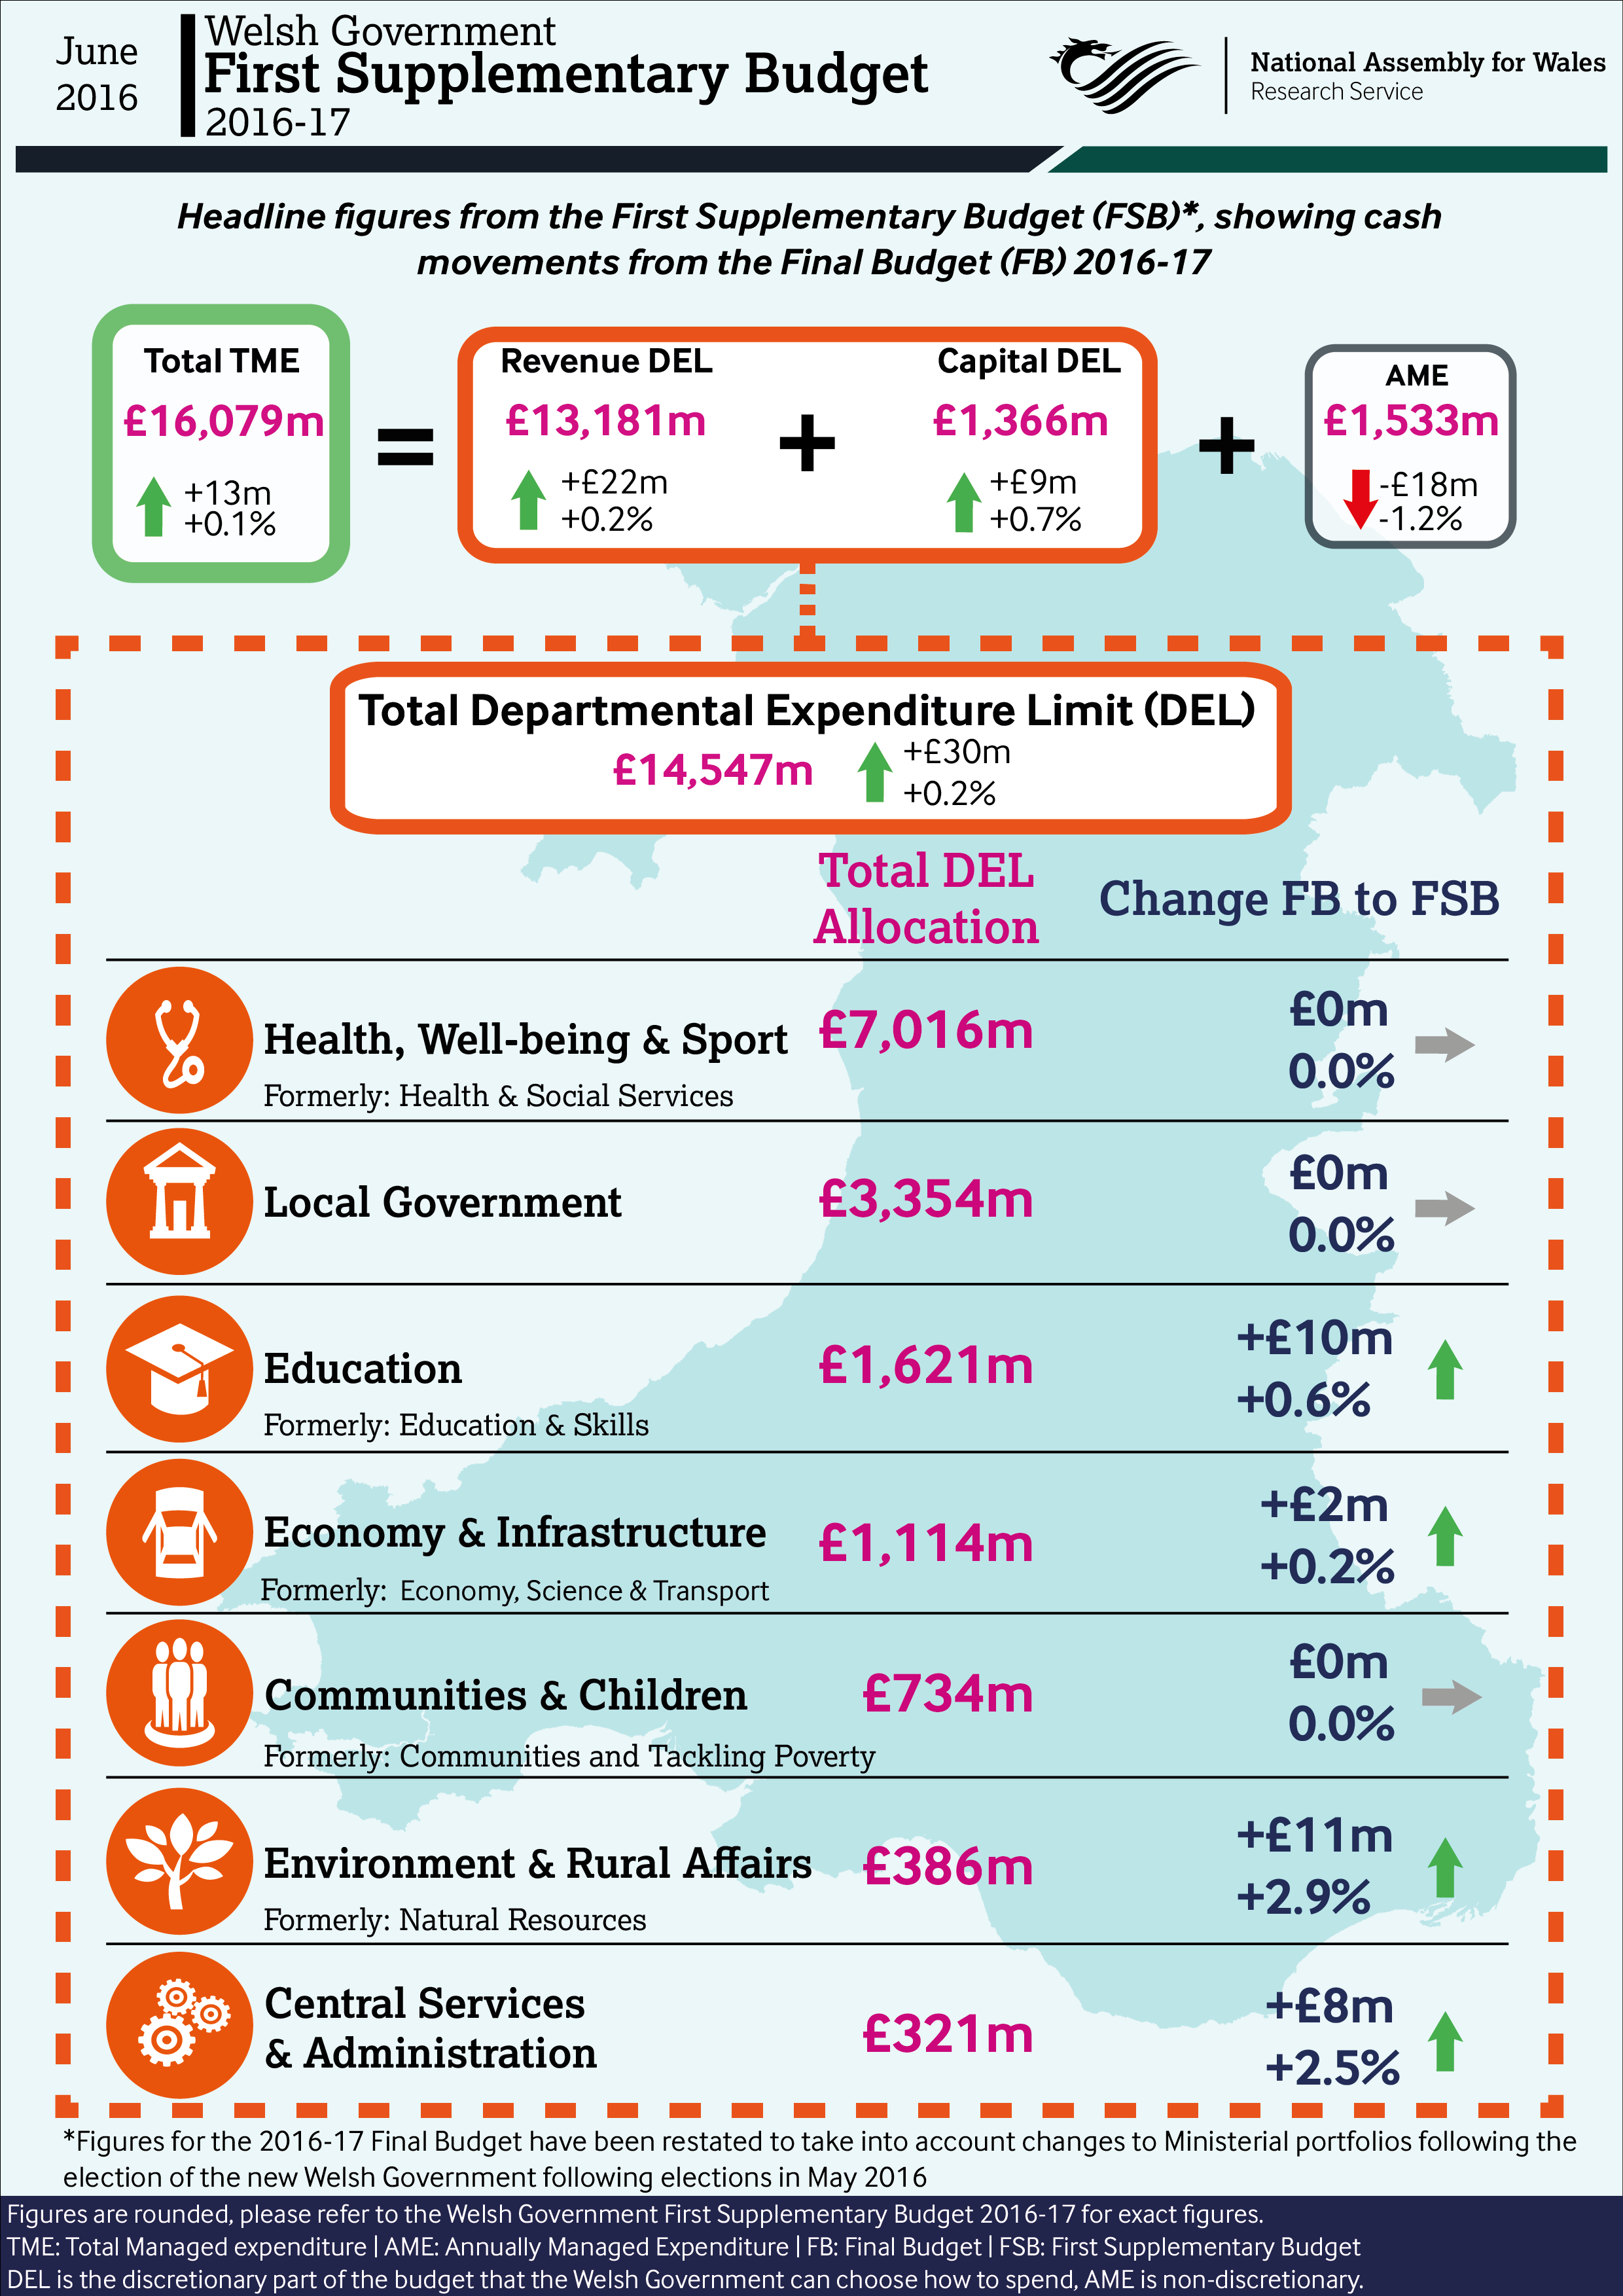 Infographic showing headline figures from the First Supplementary Budget 2016-17